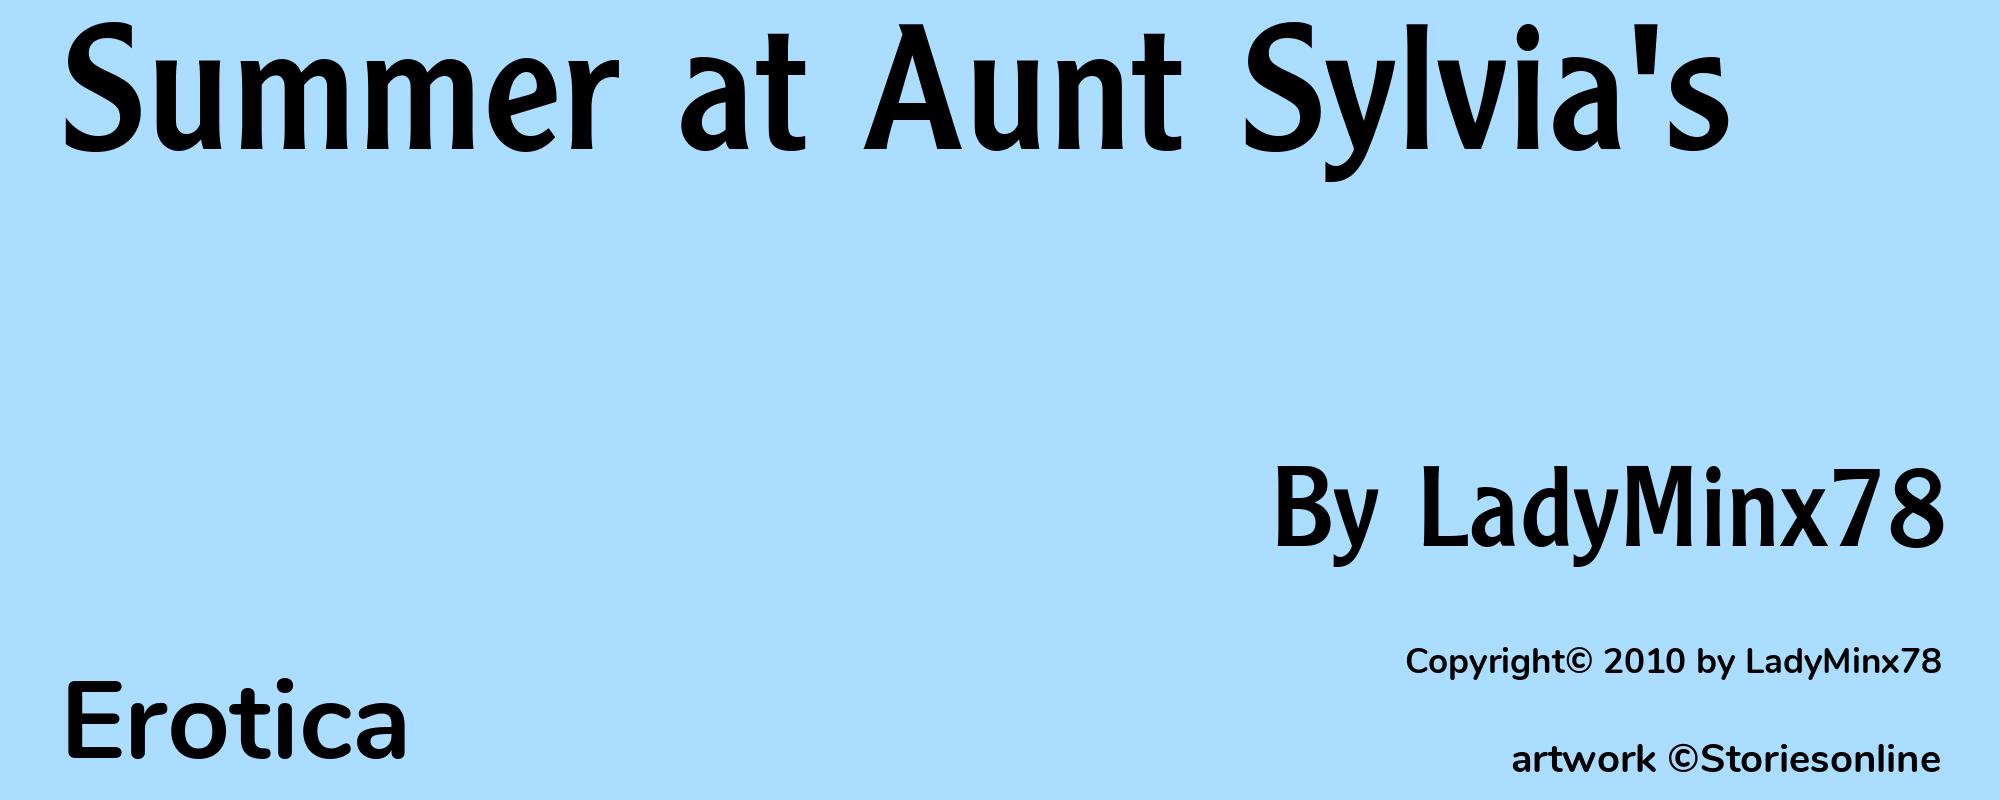 Summer at Aunt Sylvia's - Cover